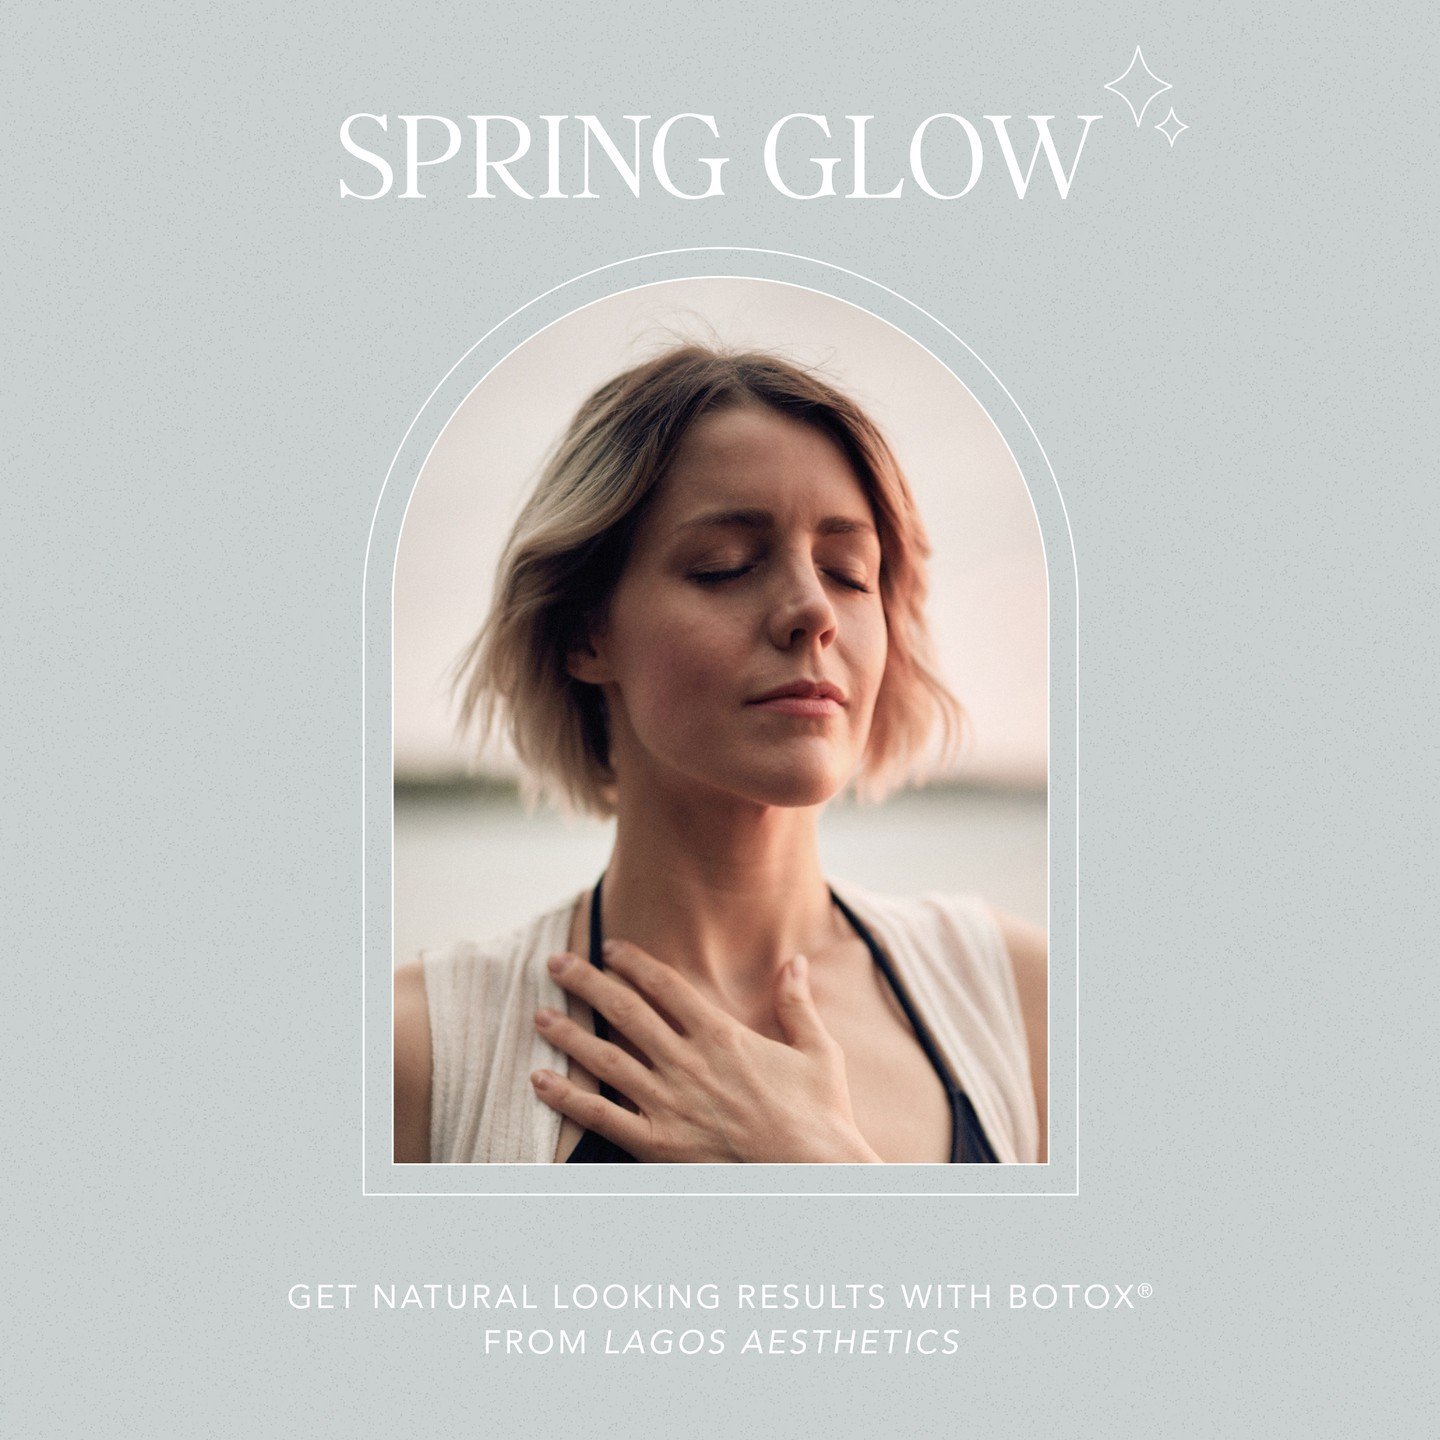 ✨ Get ready for a springtime glow-up with Lagos Aesthetics! 🌷✨ Transform your look with natural-looking Botox&reg; treatments. New season, new you! 💁&zwj;♀️💉 #LagosAesthetics #SpringGlowUp #Botox